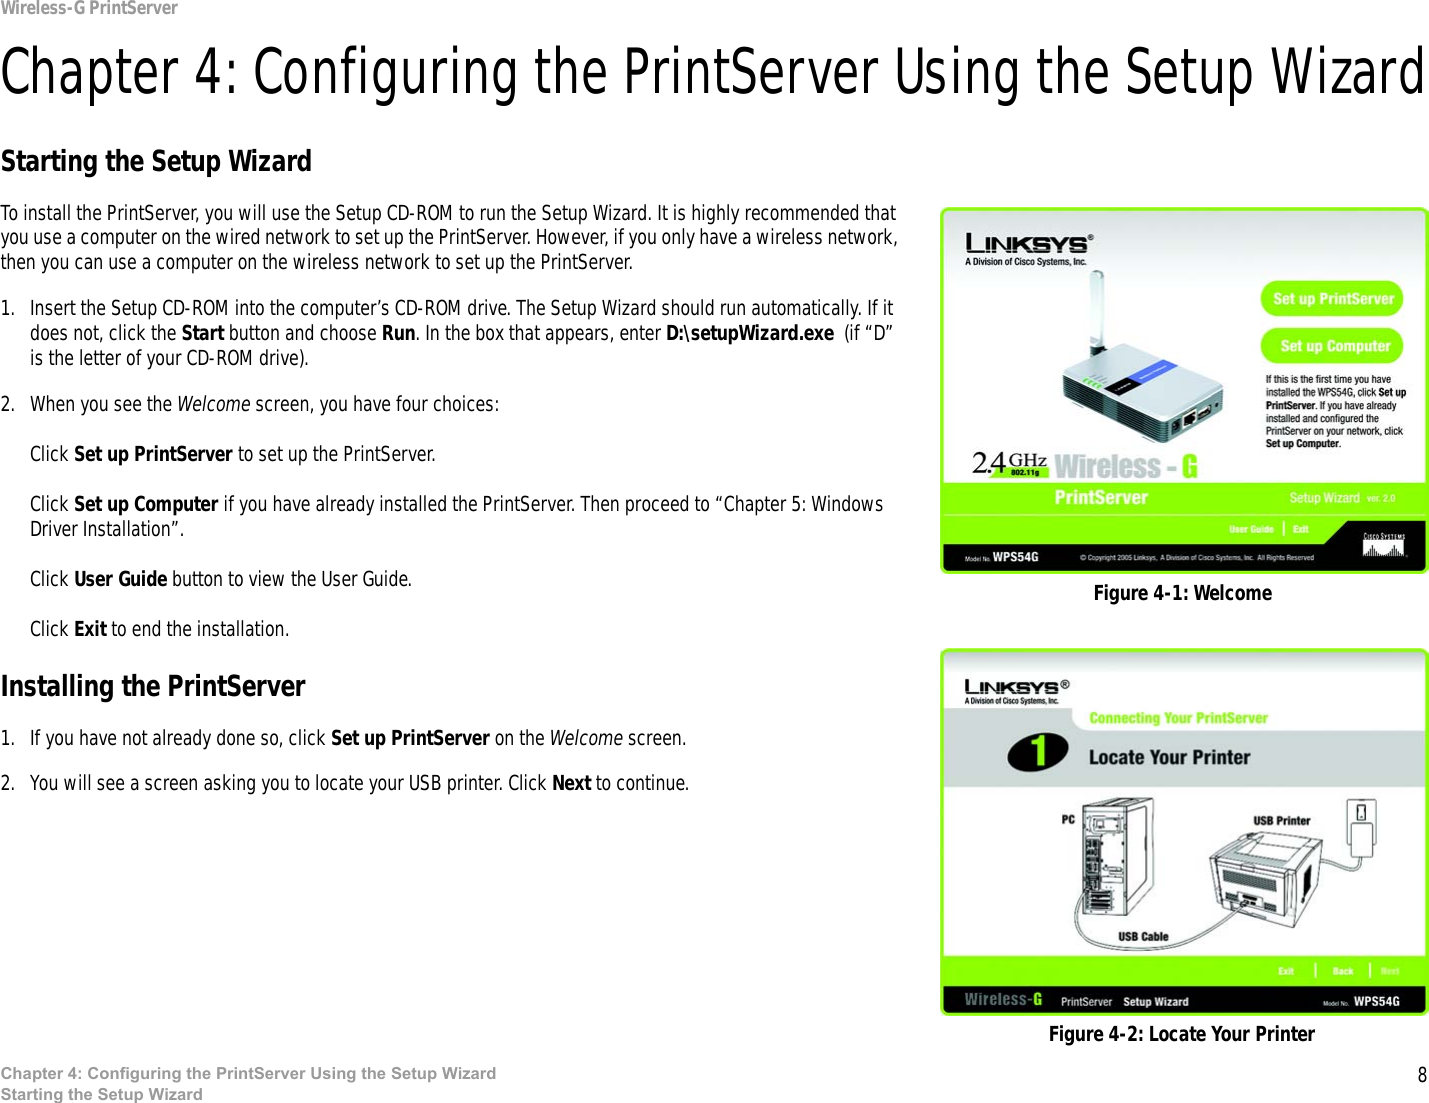 8Chapter 4: Configuring the PrintServer Using the Setup WizardStarting the Setup WizardWireless-G PrintServerChapter 4: Configuring the PrintServer Using the Setup WizardStarting the Setup WizardTo install the PrintServer, you will use the Setup CD-ROM to run the Setup Wizard. It is highly recommended that you use a computer on the wired network to set up the PrintServer. However, if you only have a wireless network, then you can use a computer on the wireless network to set up the PrintServer.1. Insert the Setup CD-ROM into the computer’s CD-ROM drive. The Setup Wizard should run automatically. If it does not, click the Start button and choose Run. In the box that appears, enter D:\setupWizard.exe  (if “D” is the letter of your CD-ROM drive).2. When you see the Welcome screen, you have four choices:Click Set up PrintServer to set up the PrintServer. Click Set up Computer if you have already installed the PrintServer. Then proceed to “Chapter 5: Windows Driver Installation”.Click User Guide button to view the User Guide. Click Exit to end the installation.Installing the PrintServer1. If you have not already done so, click Set up PrintServer on the Welcome screen.2. You will see a screen asking you to locate your USB printer. Click Next to continue.Figure 4-1: WelcomeFigure 4-2: Locate Your Printer